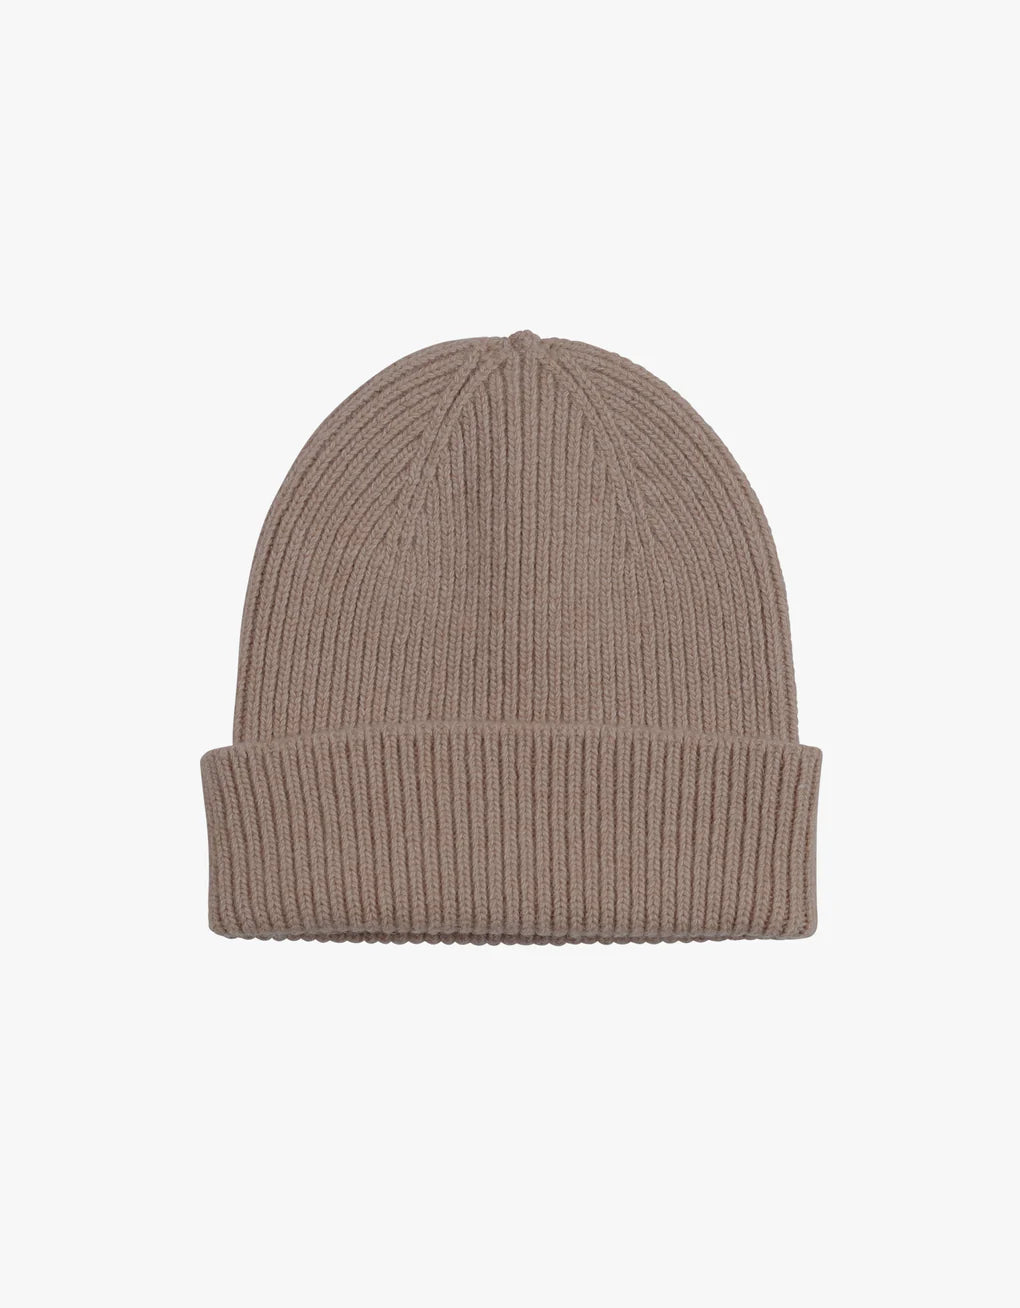 BEANIE BY COLORFUL STANDARD